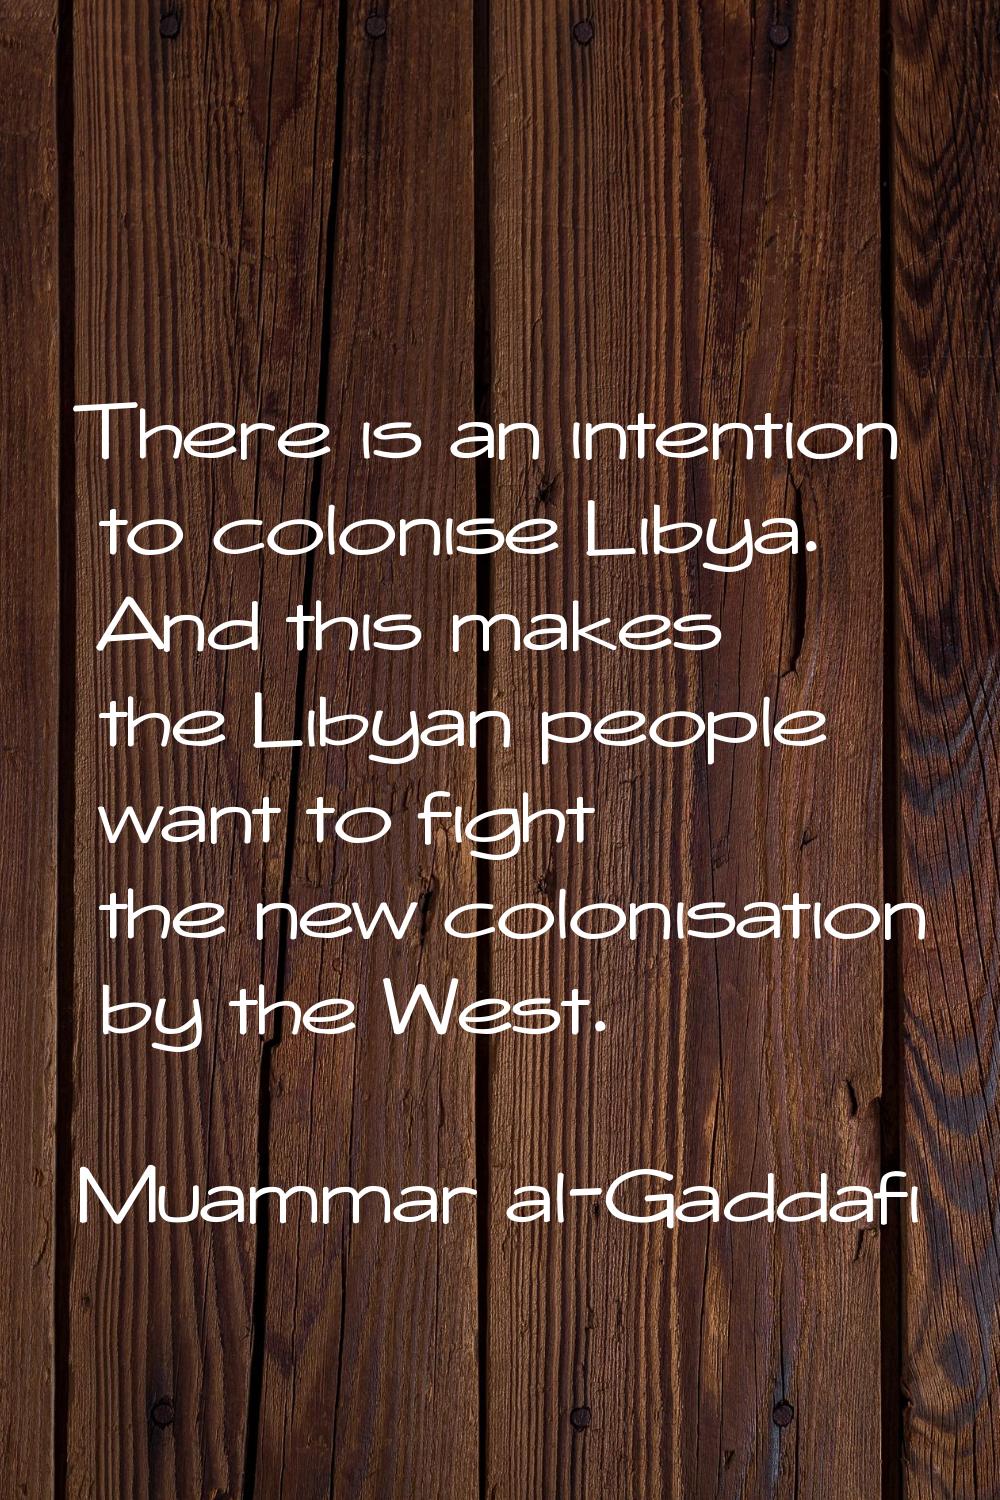 There is an intention to colonise Libya. And this makes the Libyan people want to fight the new col